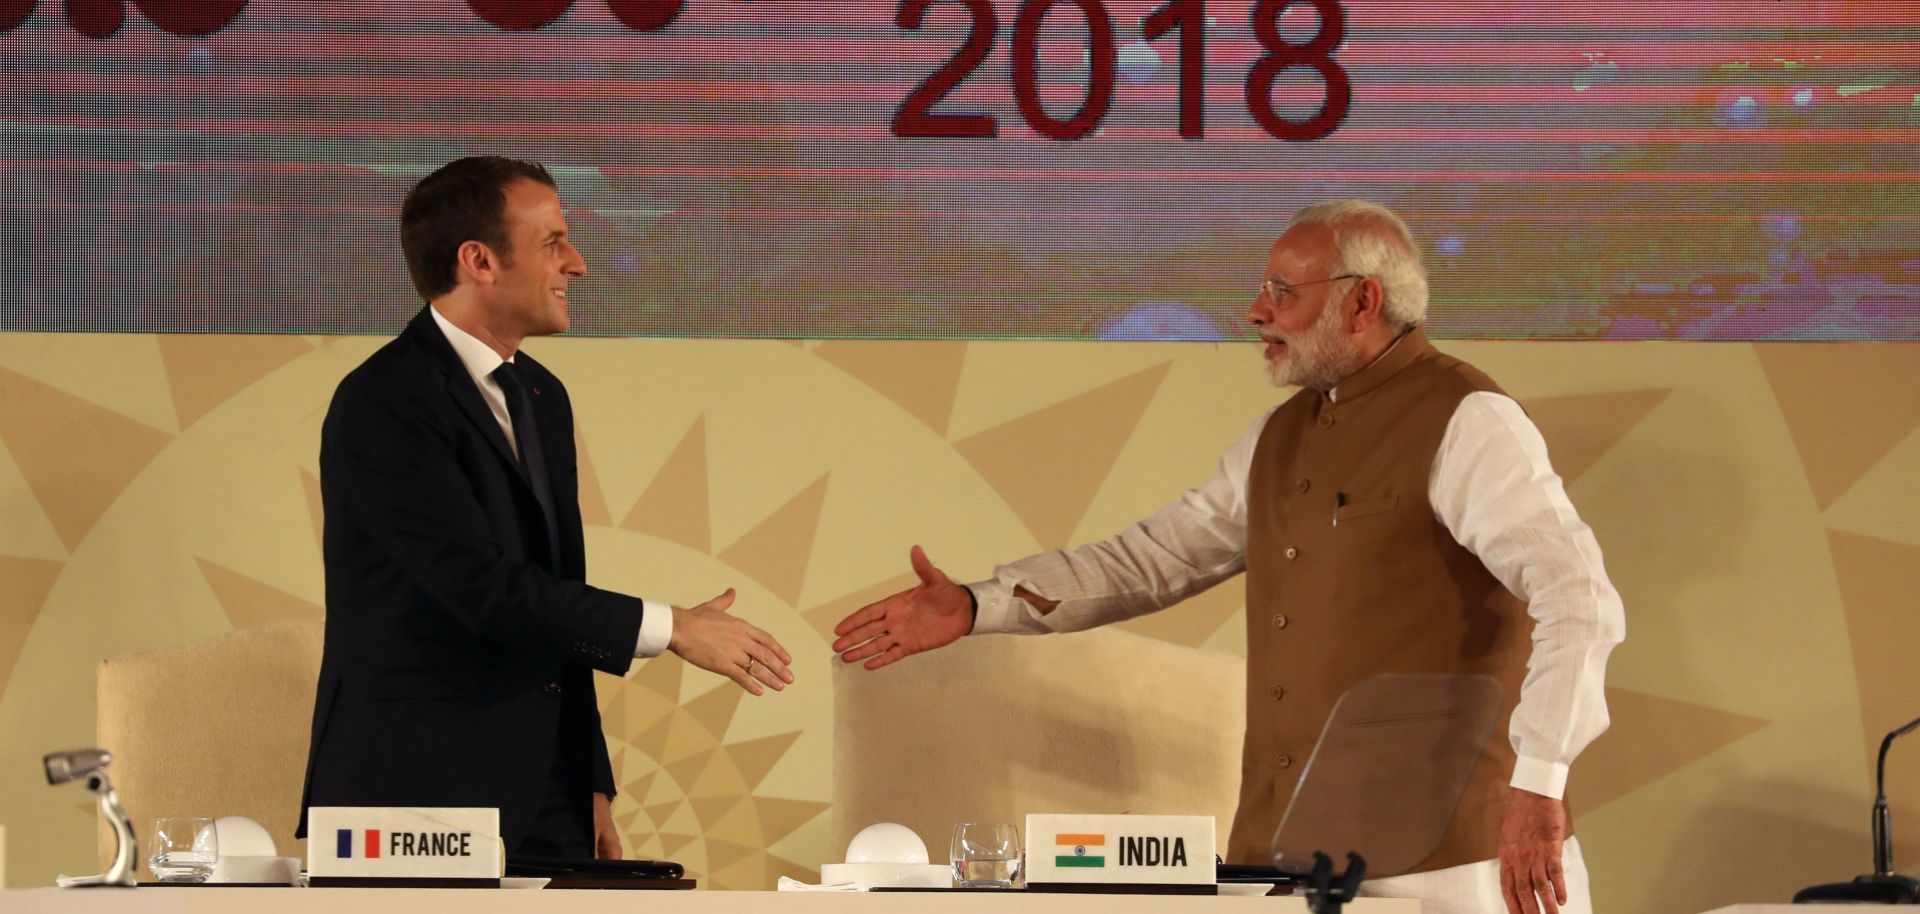 French President Emmanuel Macron, left, and Indian Prime Minister Narendra Modi shake hands at the first conference of the International Solar Alliance, a cooperative effort their countries launched in 2015.